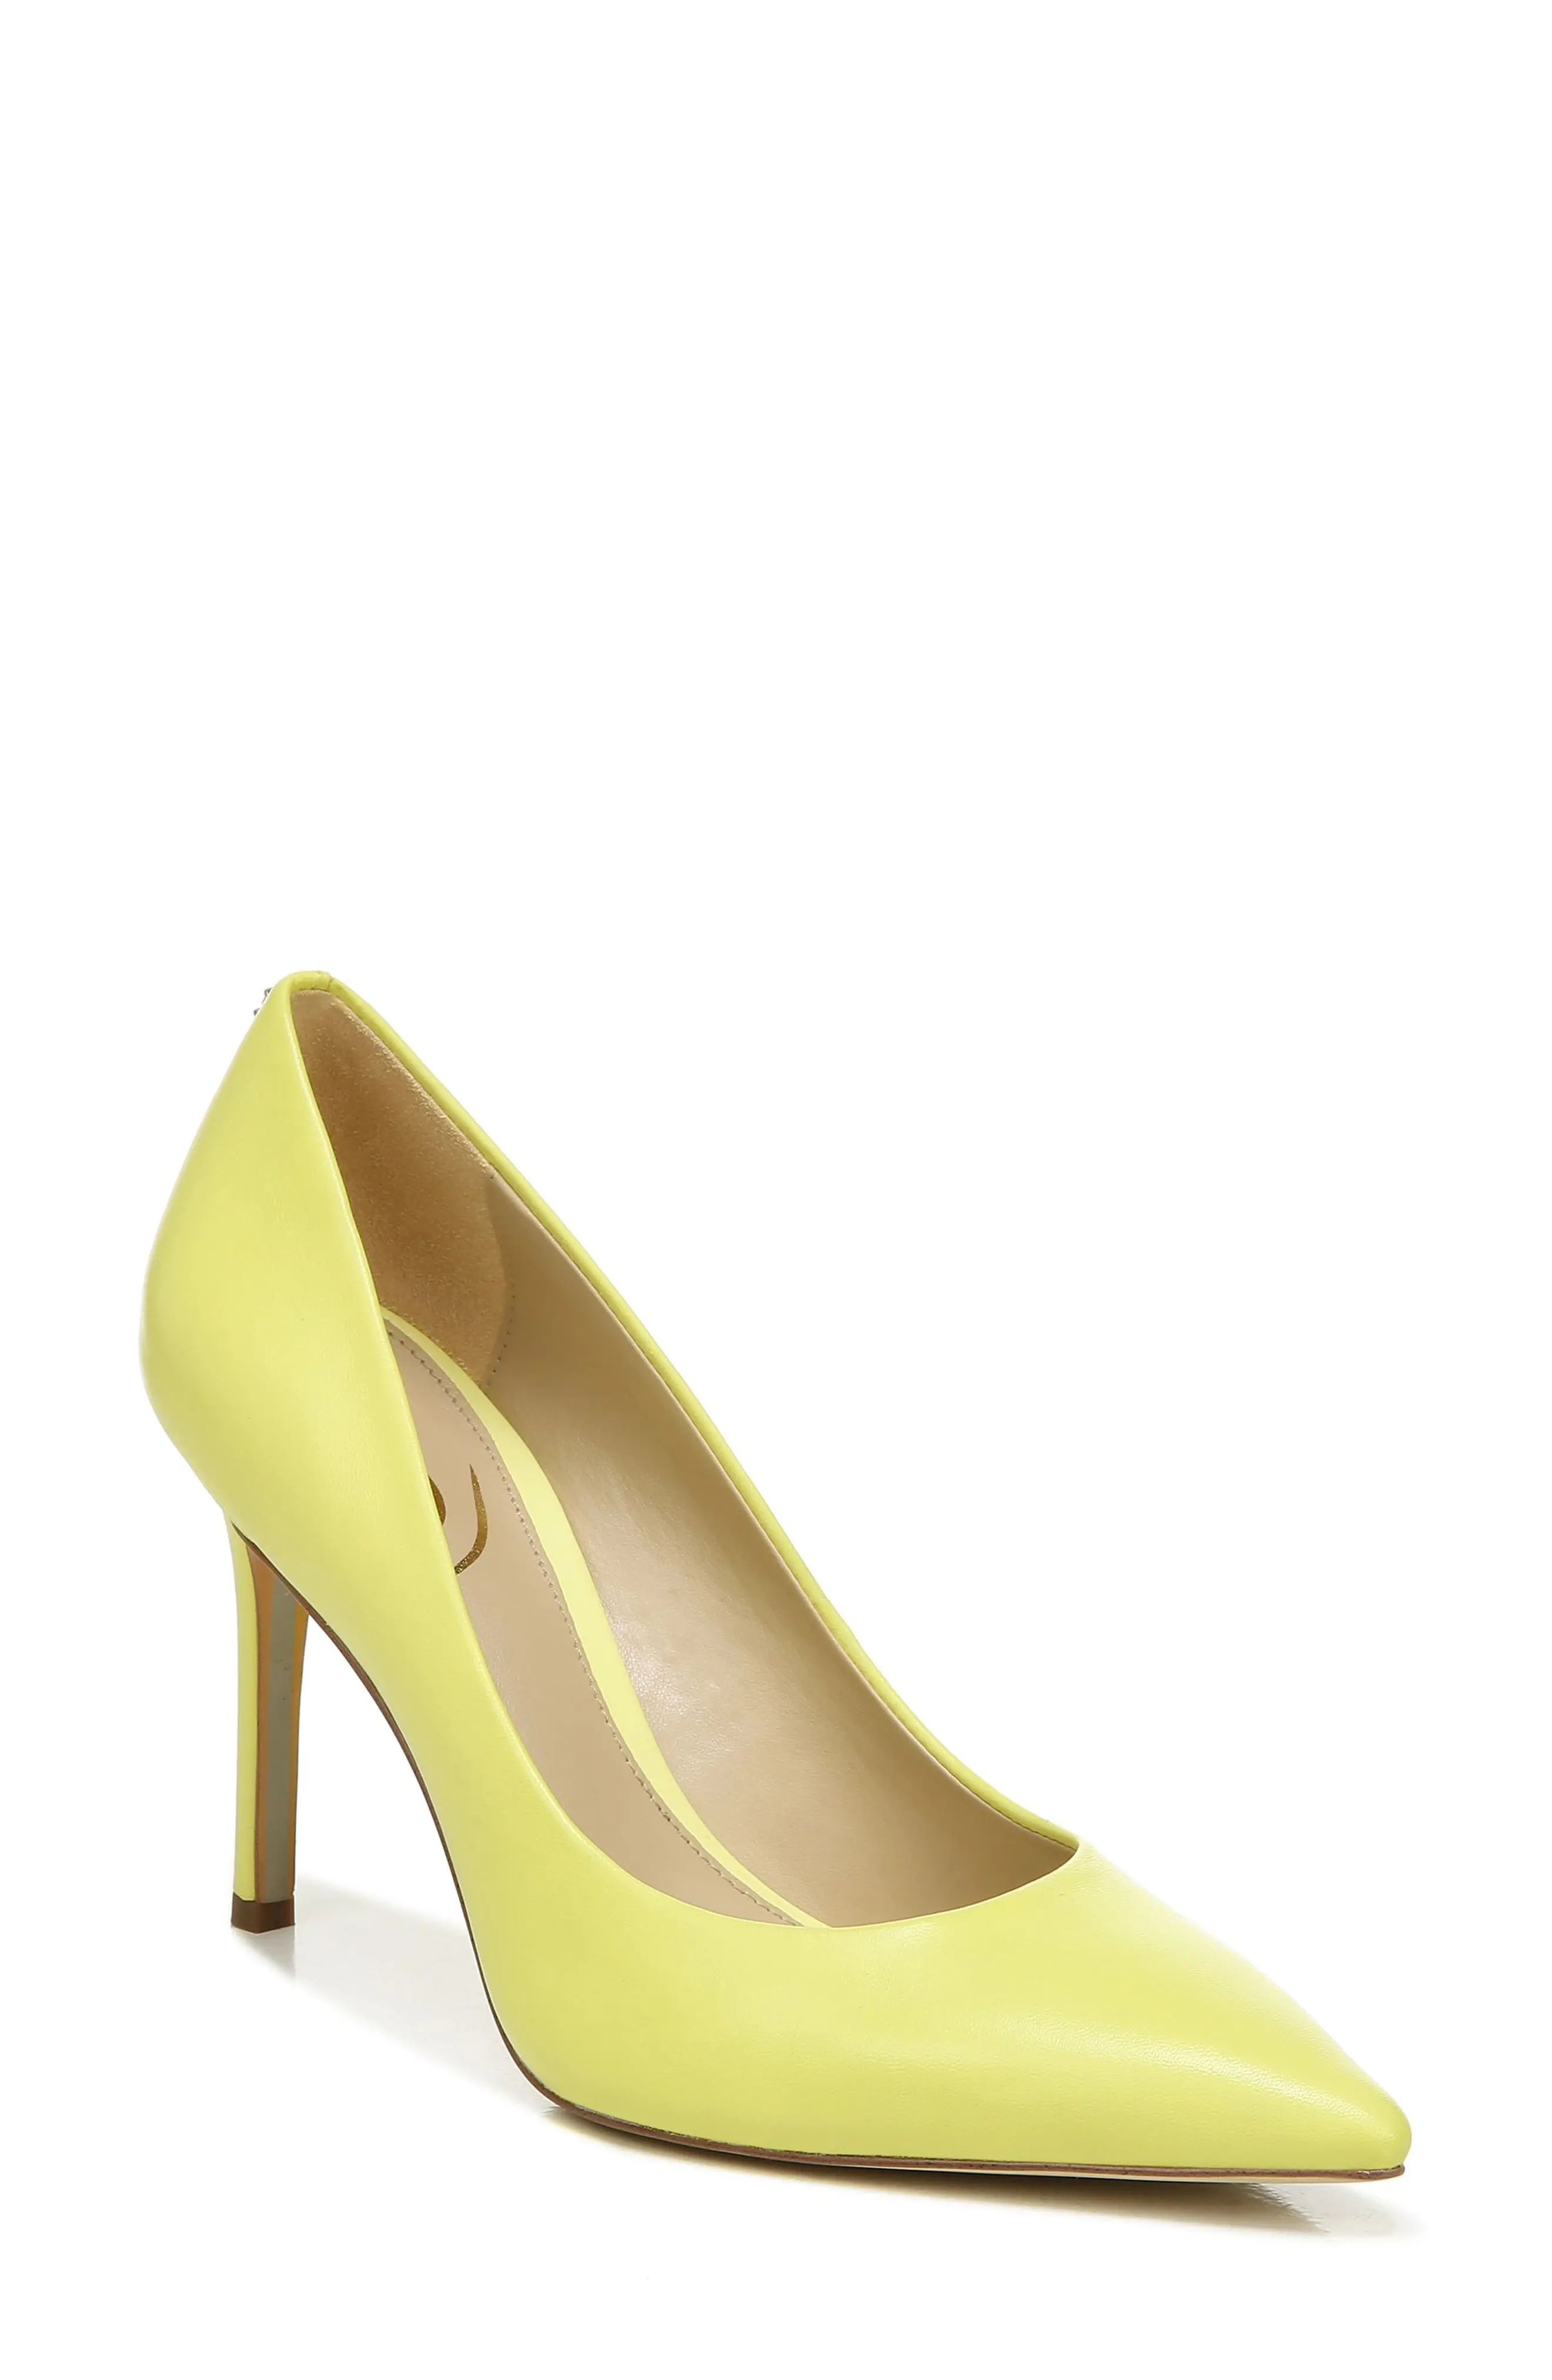 Sam Edelman Hazel Pointed Toe Pump in Butter Yellow at Nordstrom, Size 11 | Nordstrom